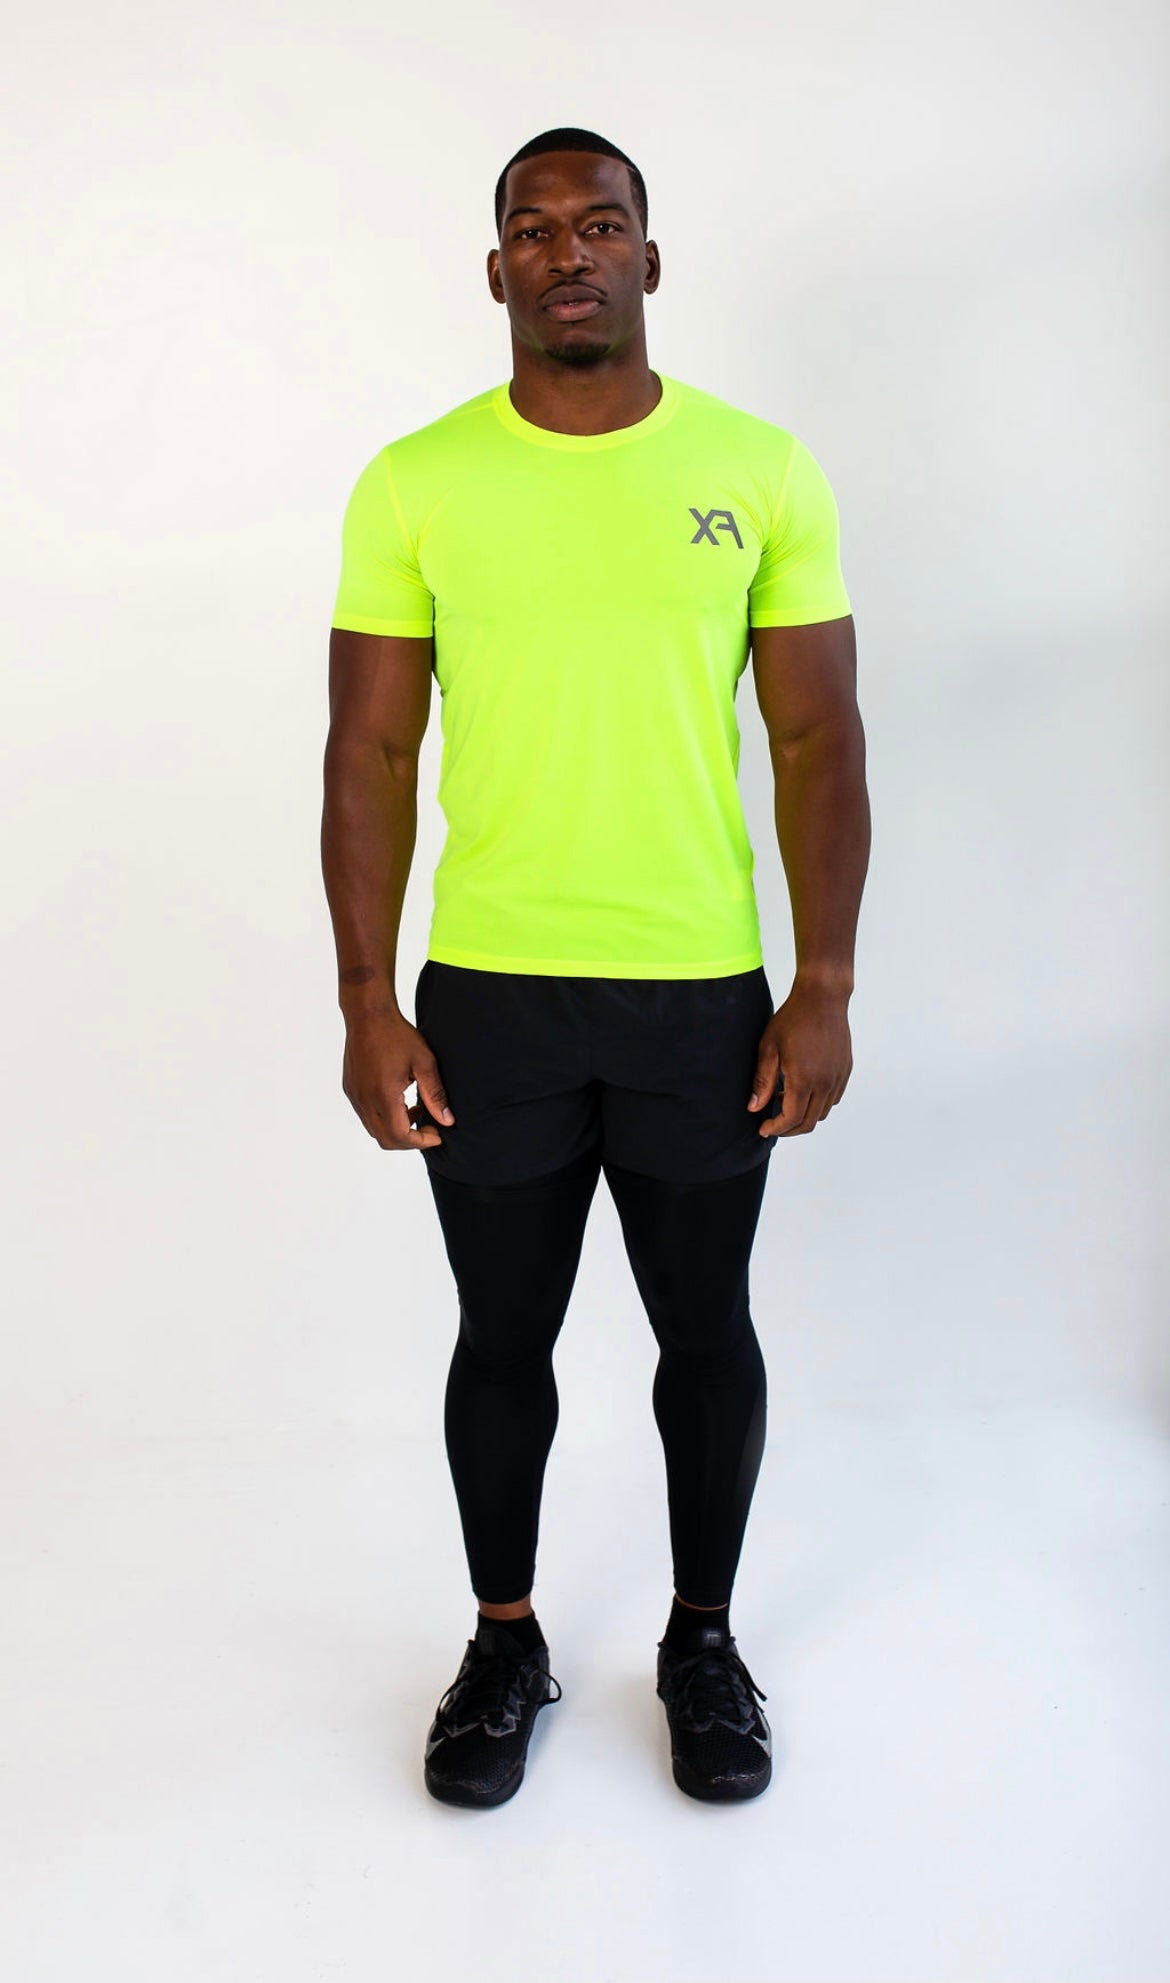 A new wear of living – Xodus Fitness Apparel